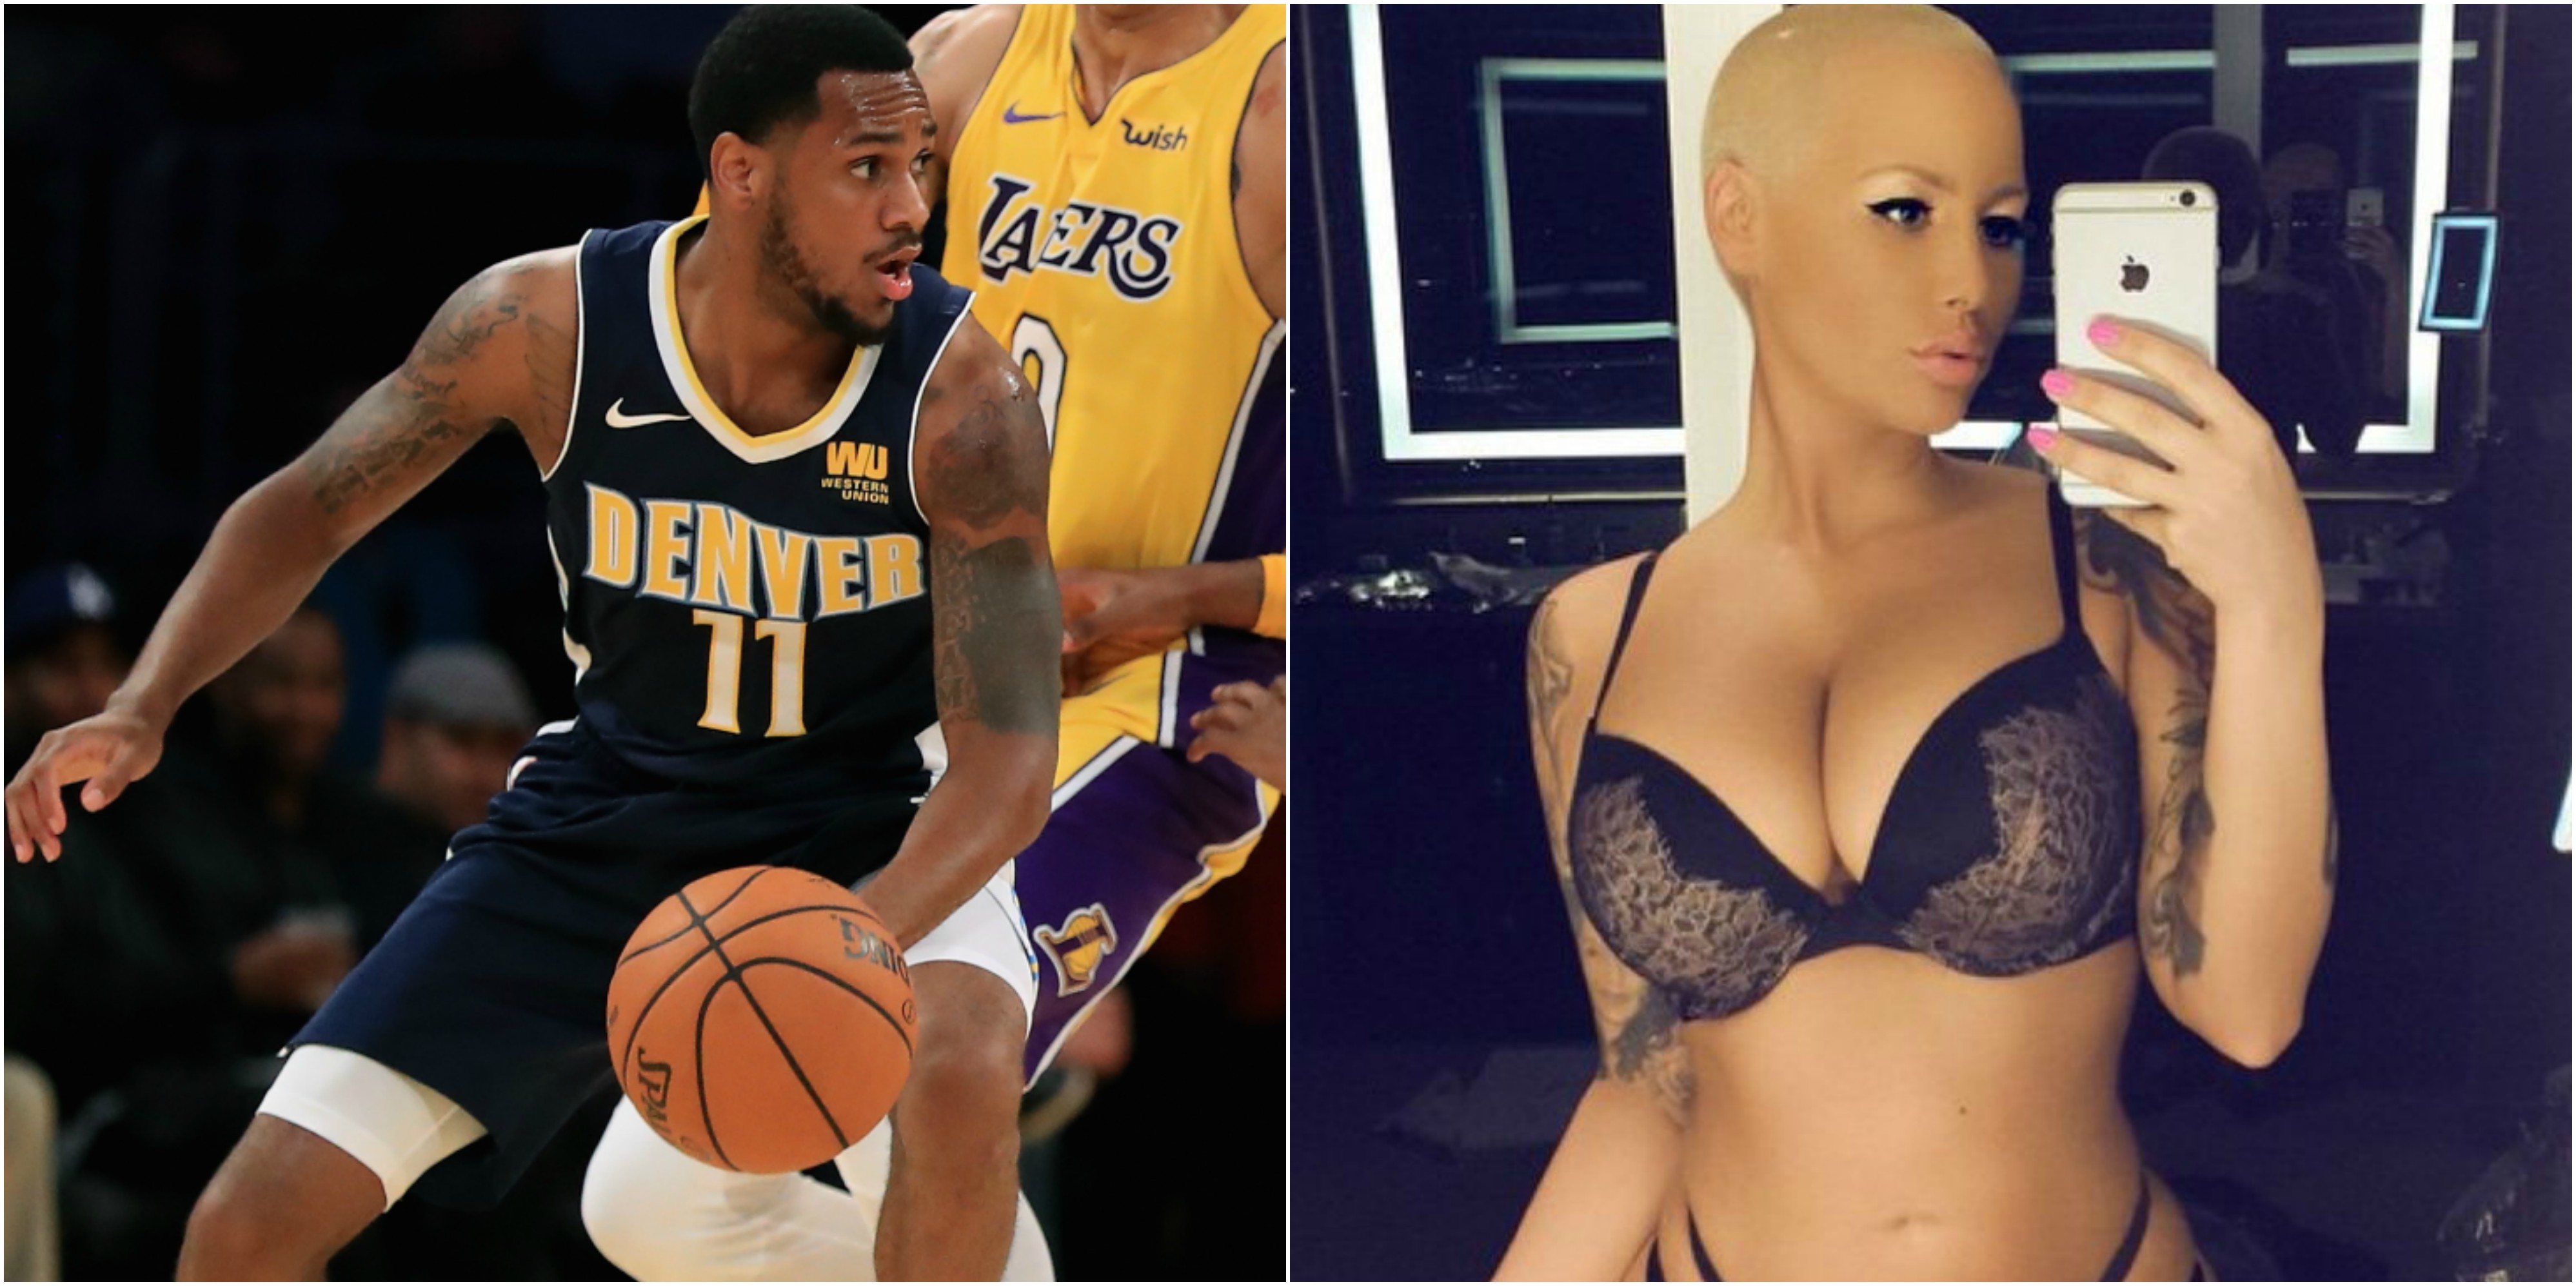 Who is amber rose dating right now